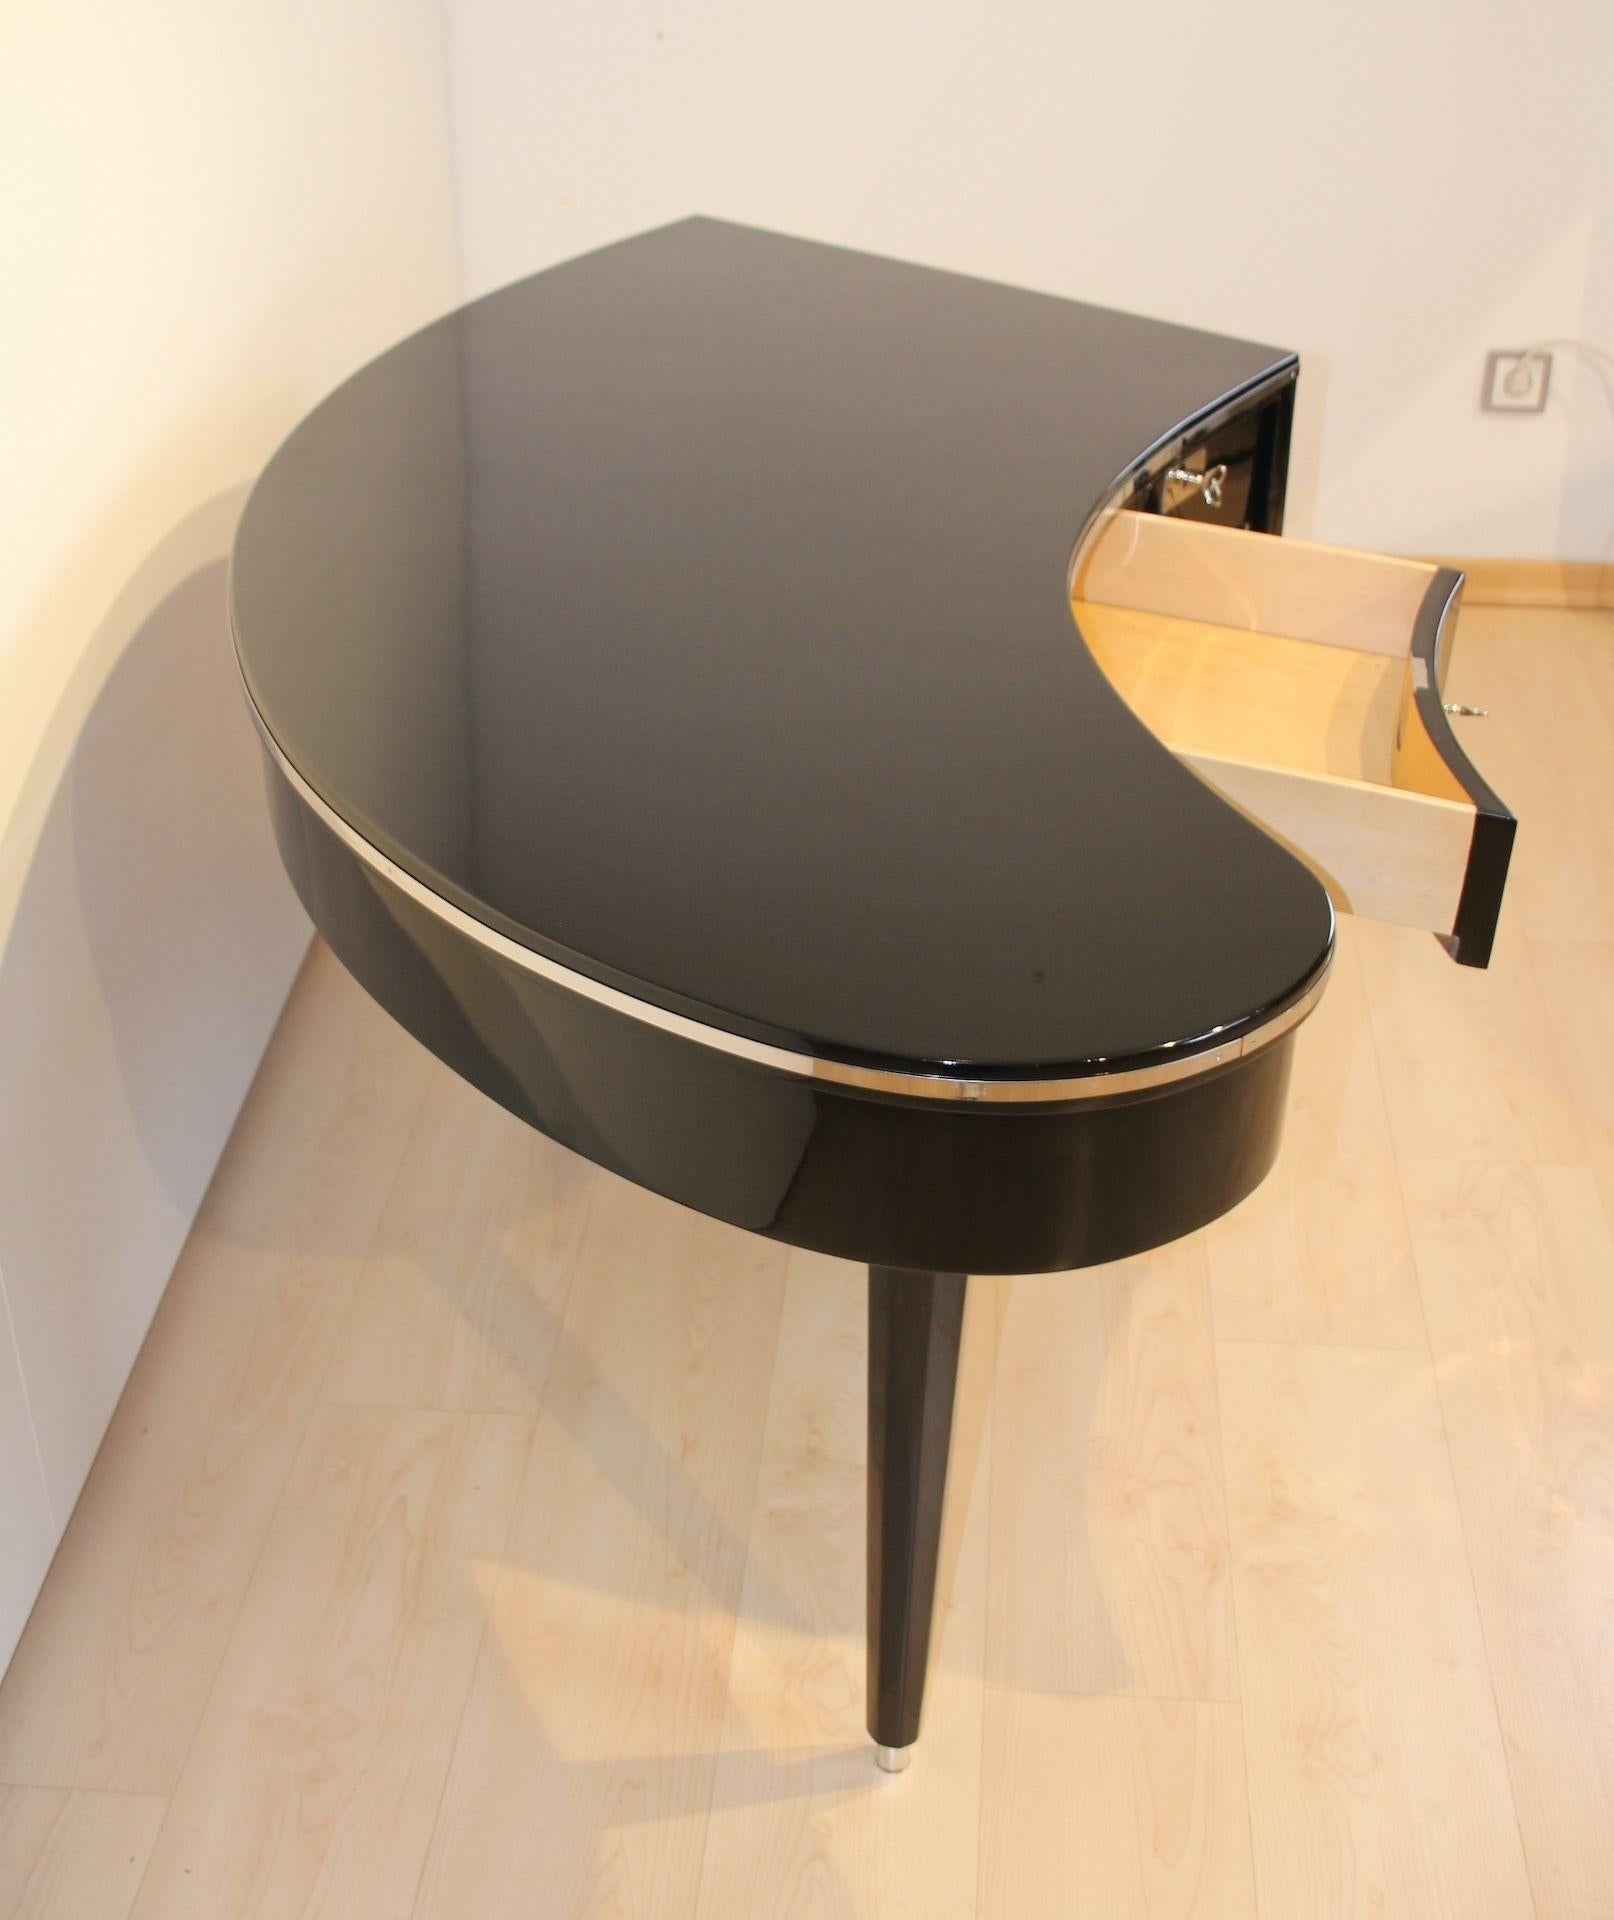 Design Desk, Curved Top, Piano Lacquer, Chrome, France, 1950s For Sale 3